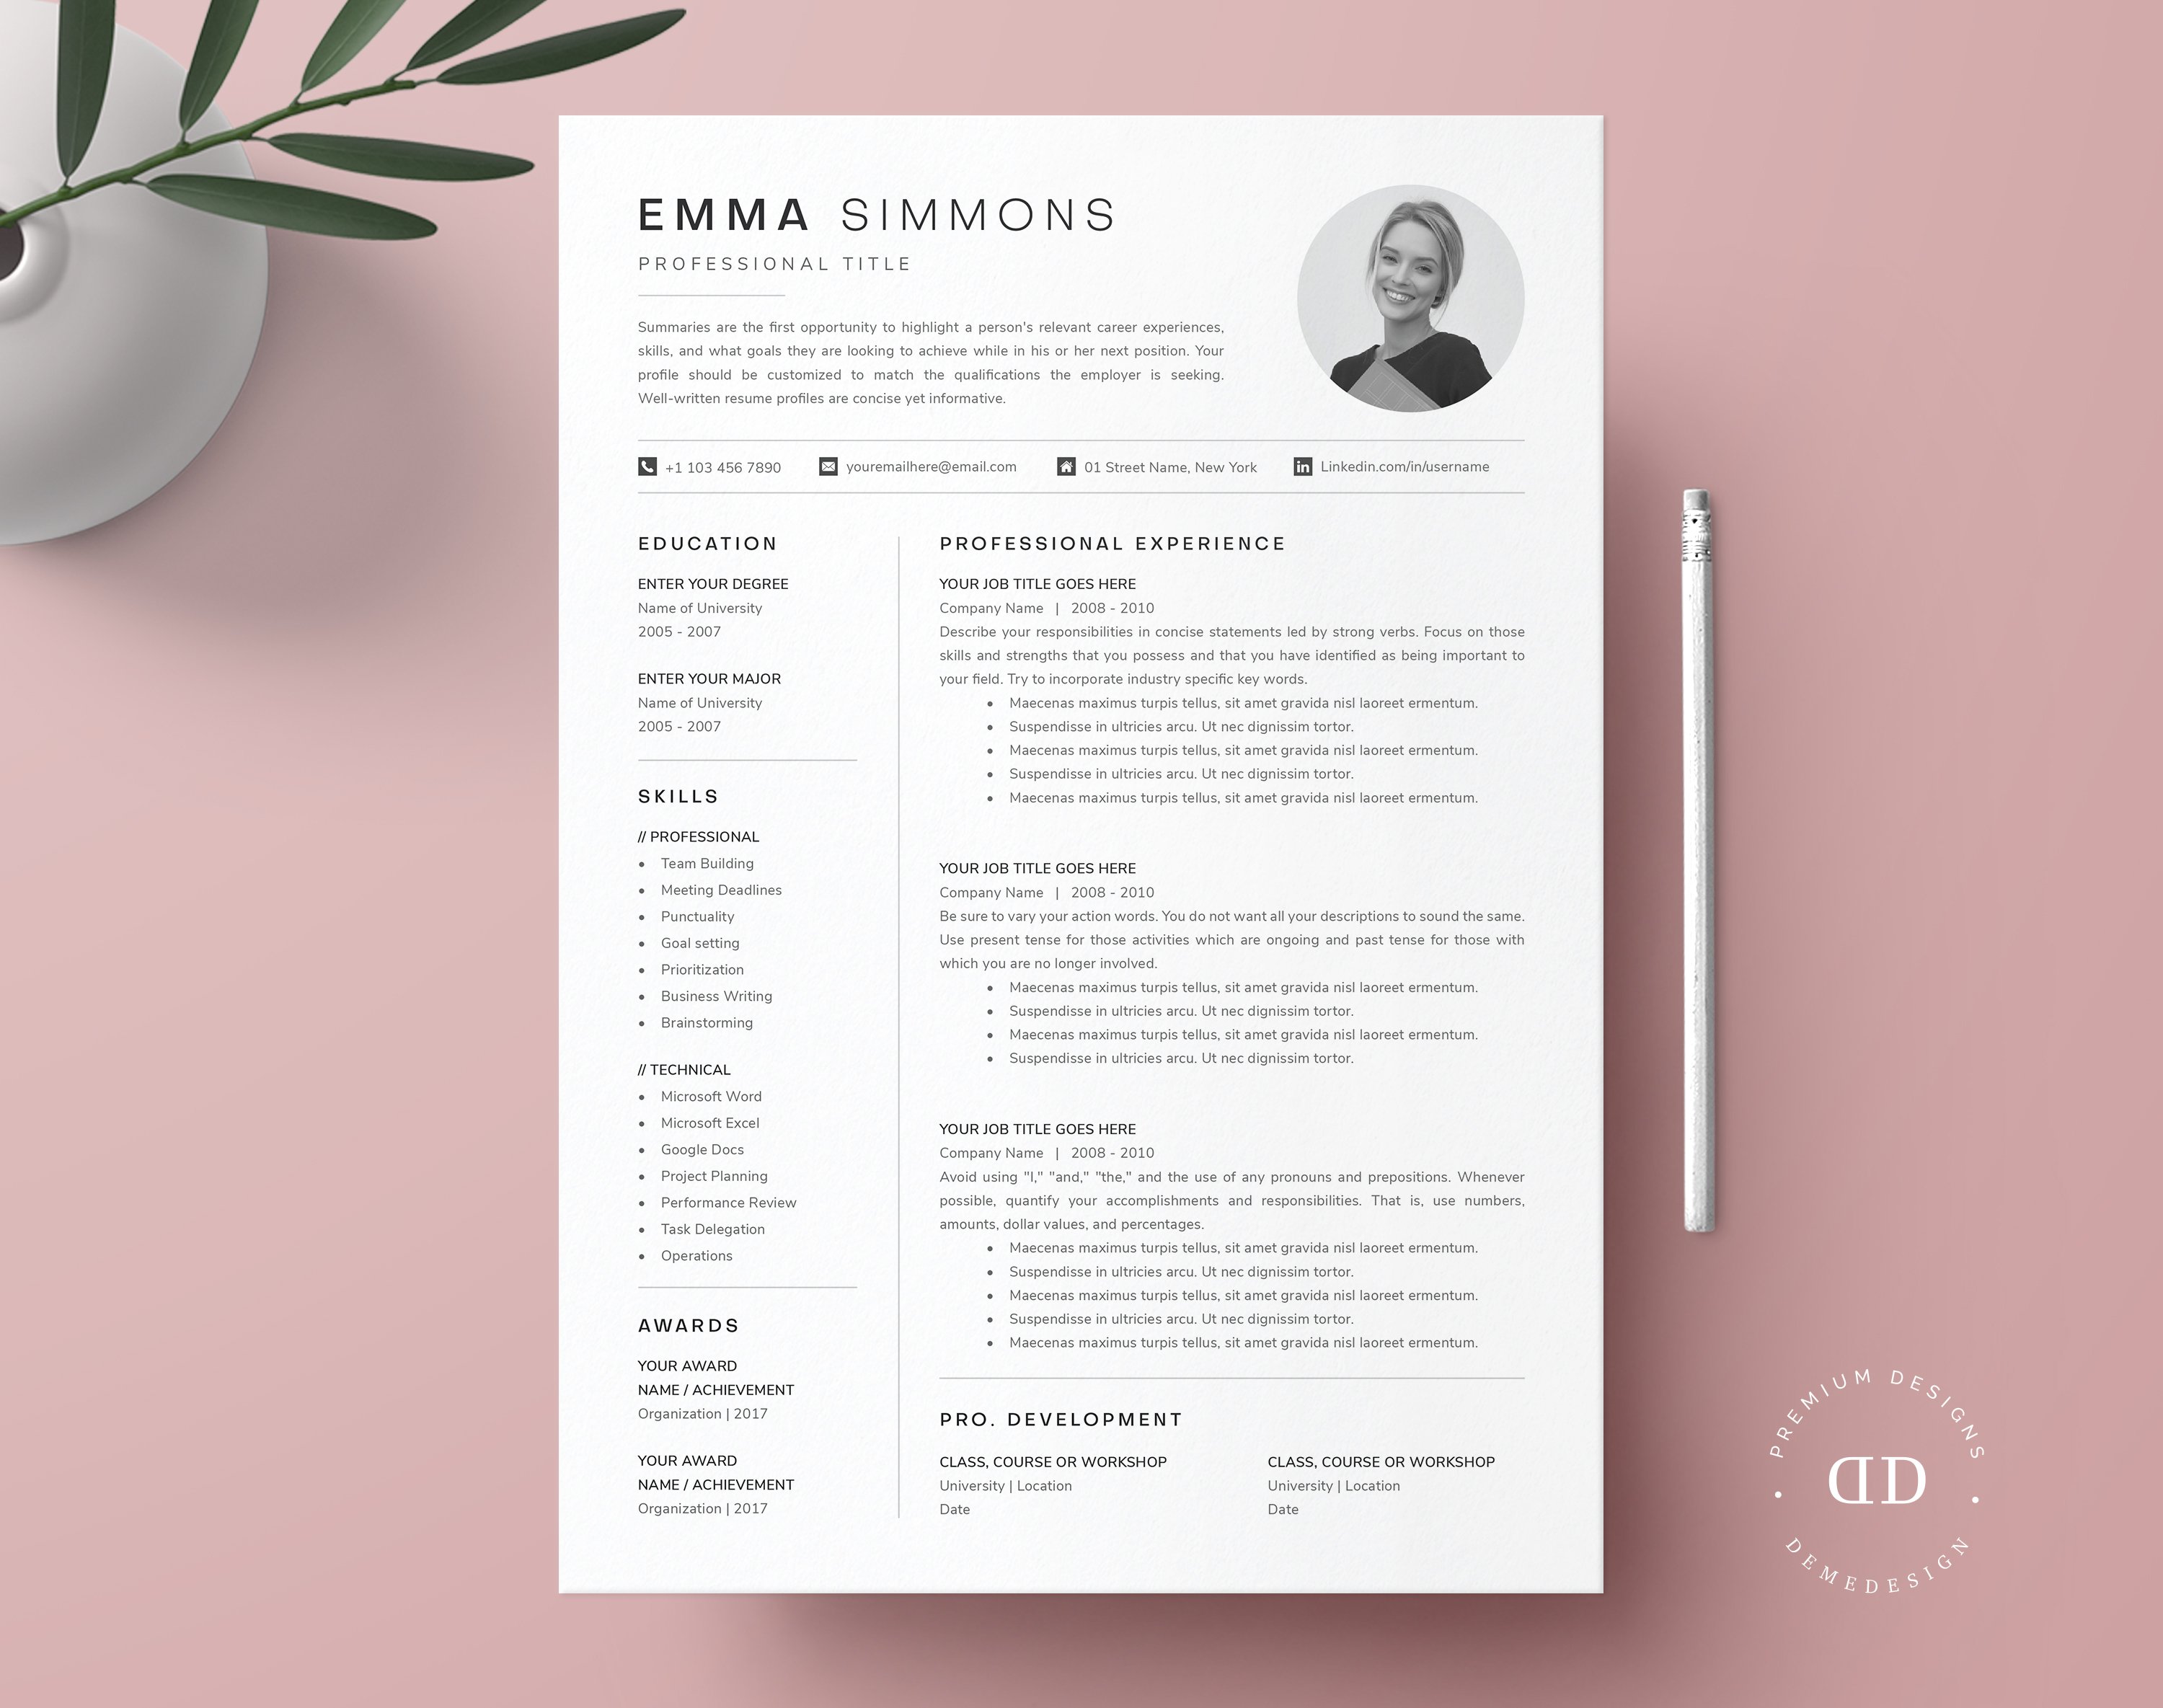 Compact One Page Resume Template Kit cover image.